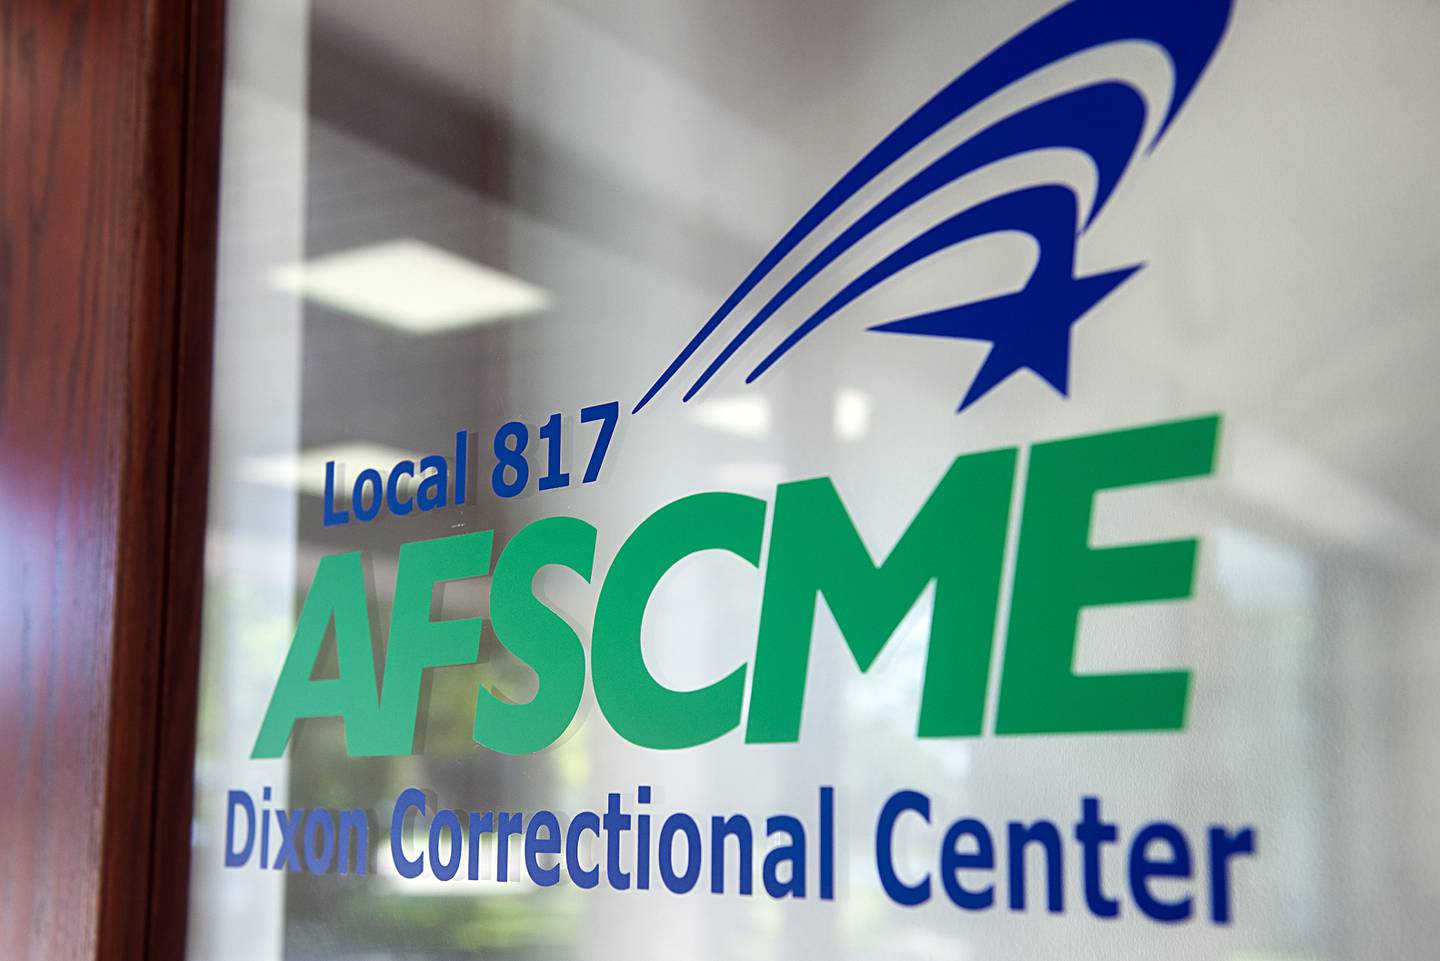 Eric McCubbin, Local 817 president, is concerned over the lack of staff at the Dixon Correctional Center. The prison is well over 200 understaffed which puts guards at risk.